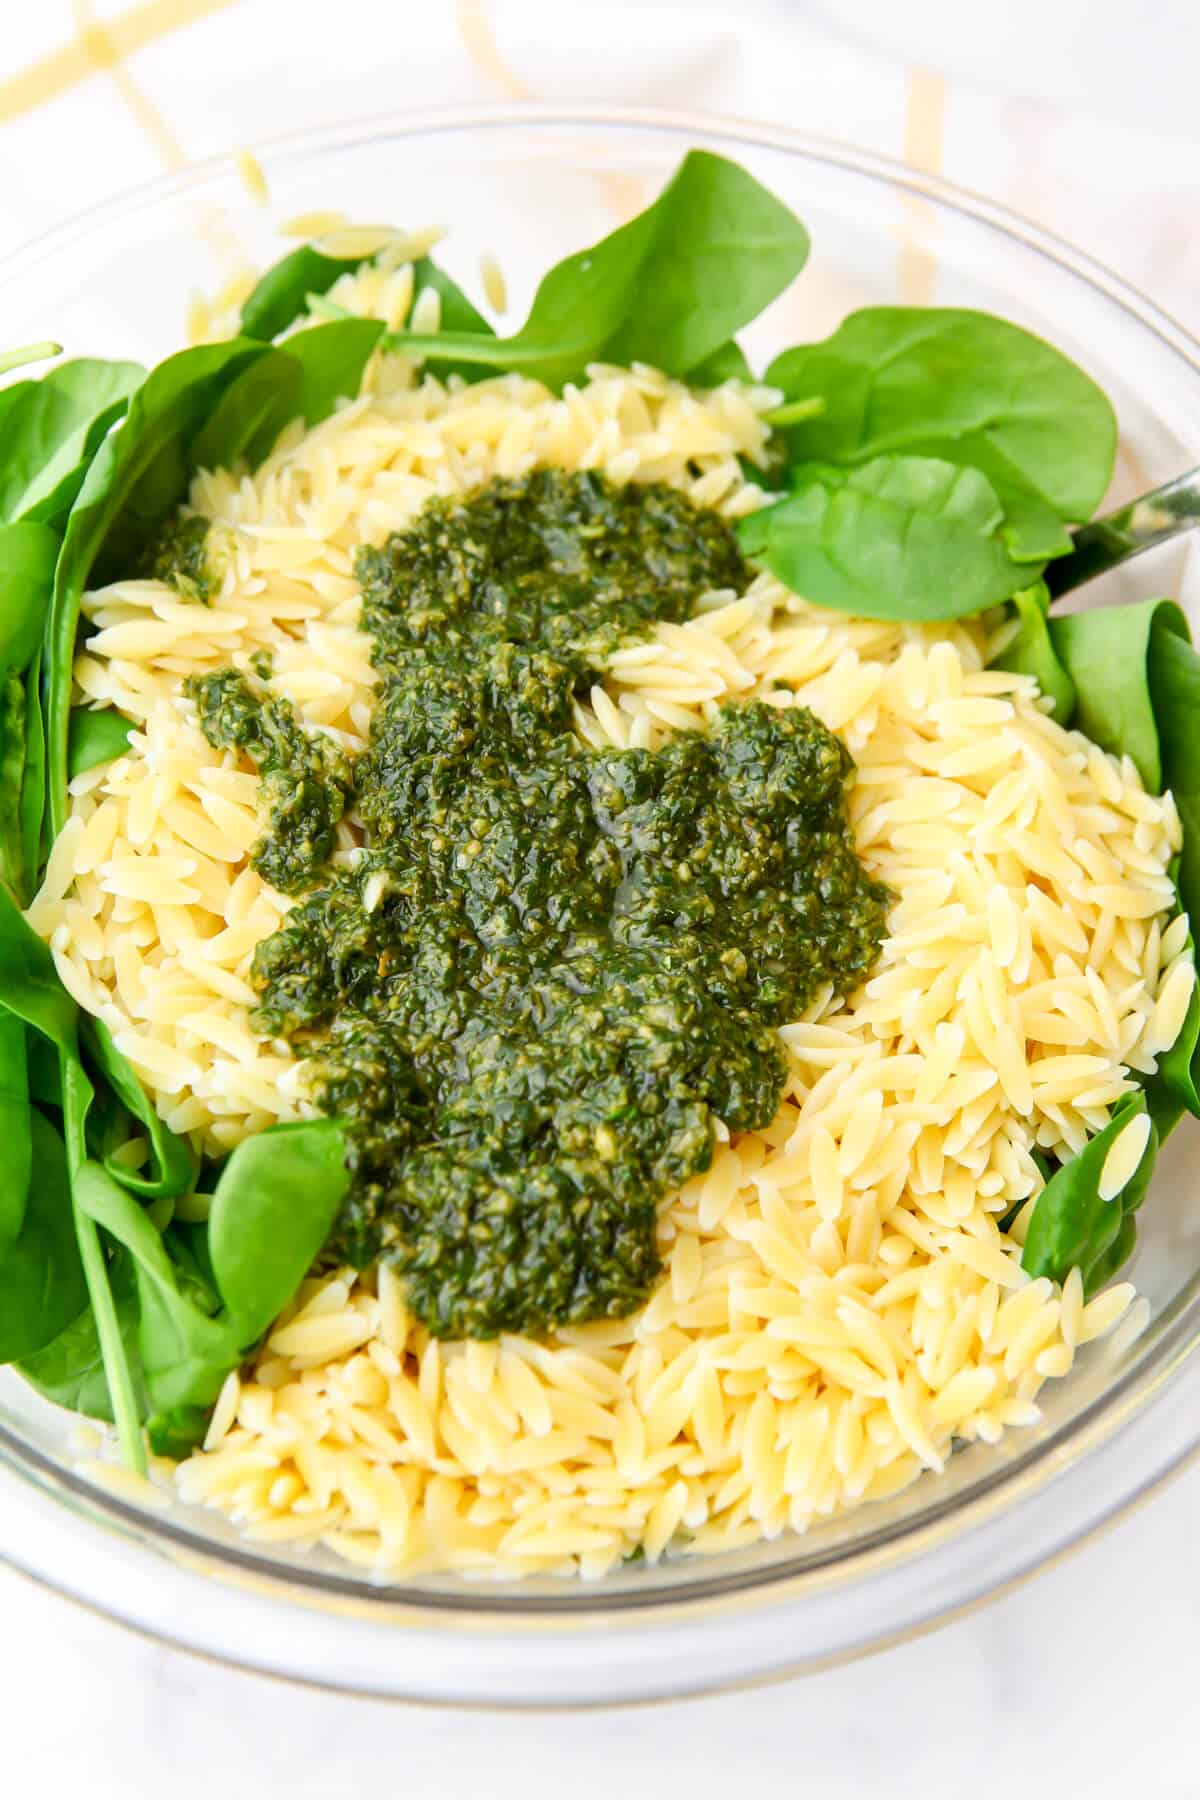 Baby spinach topped with cooked orzo with pesto in a salad bowl.